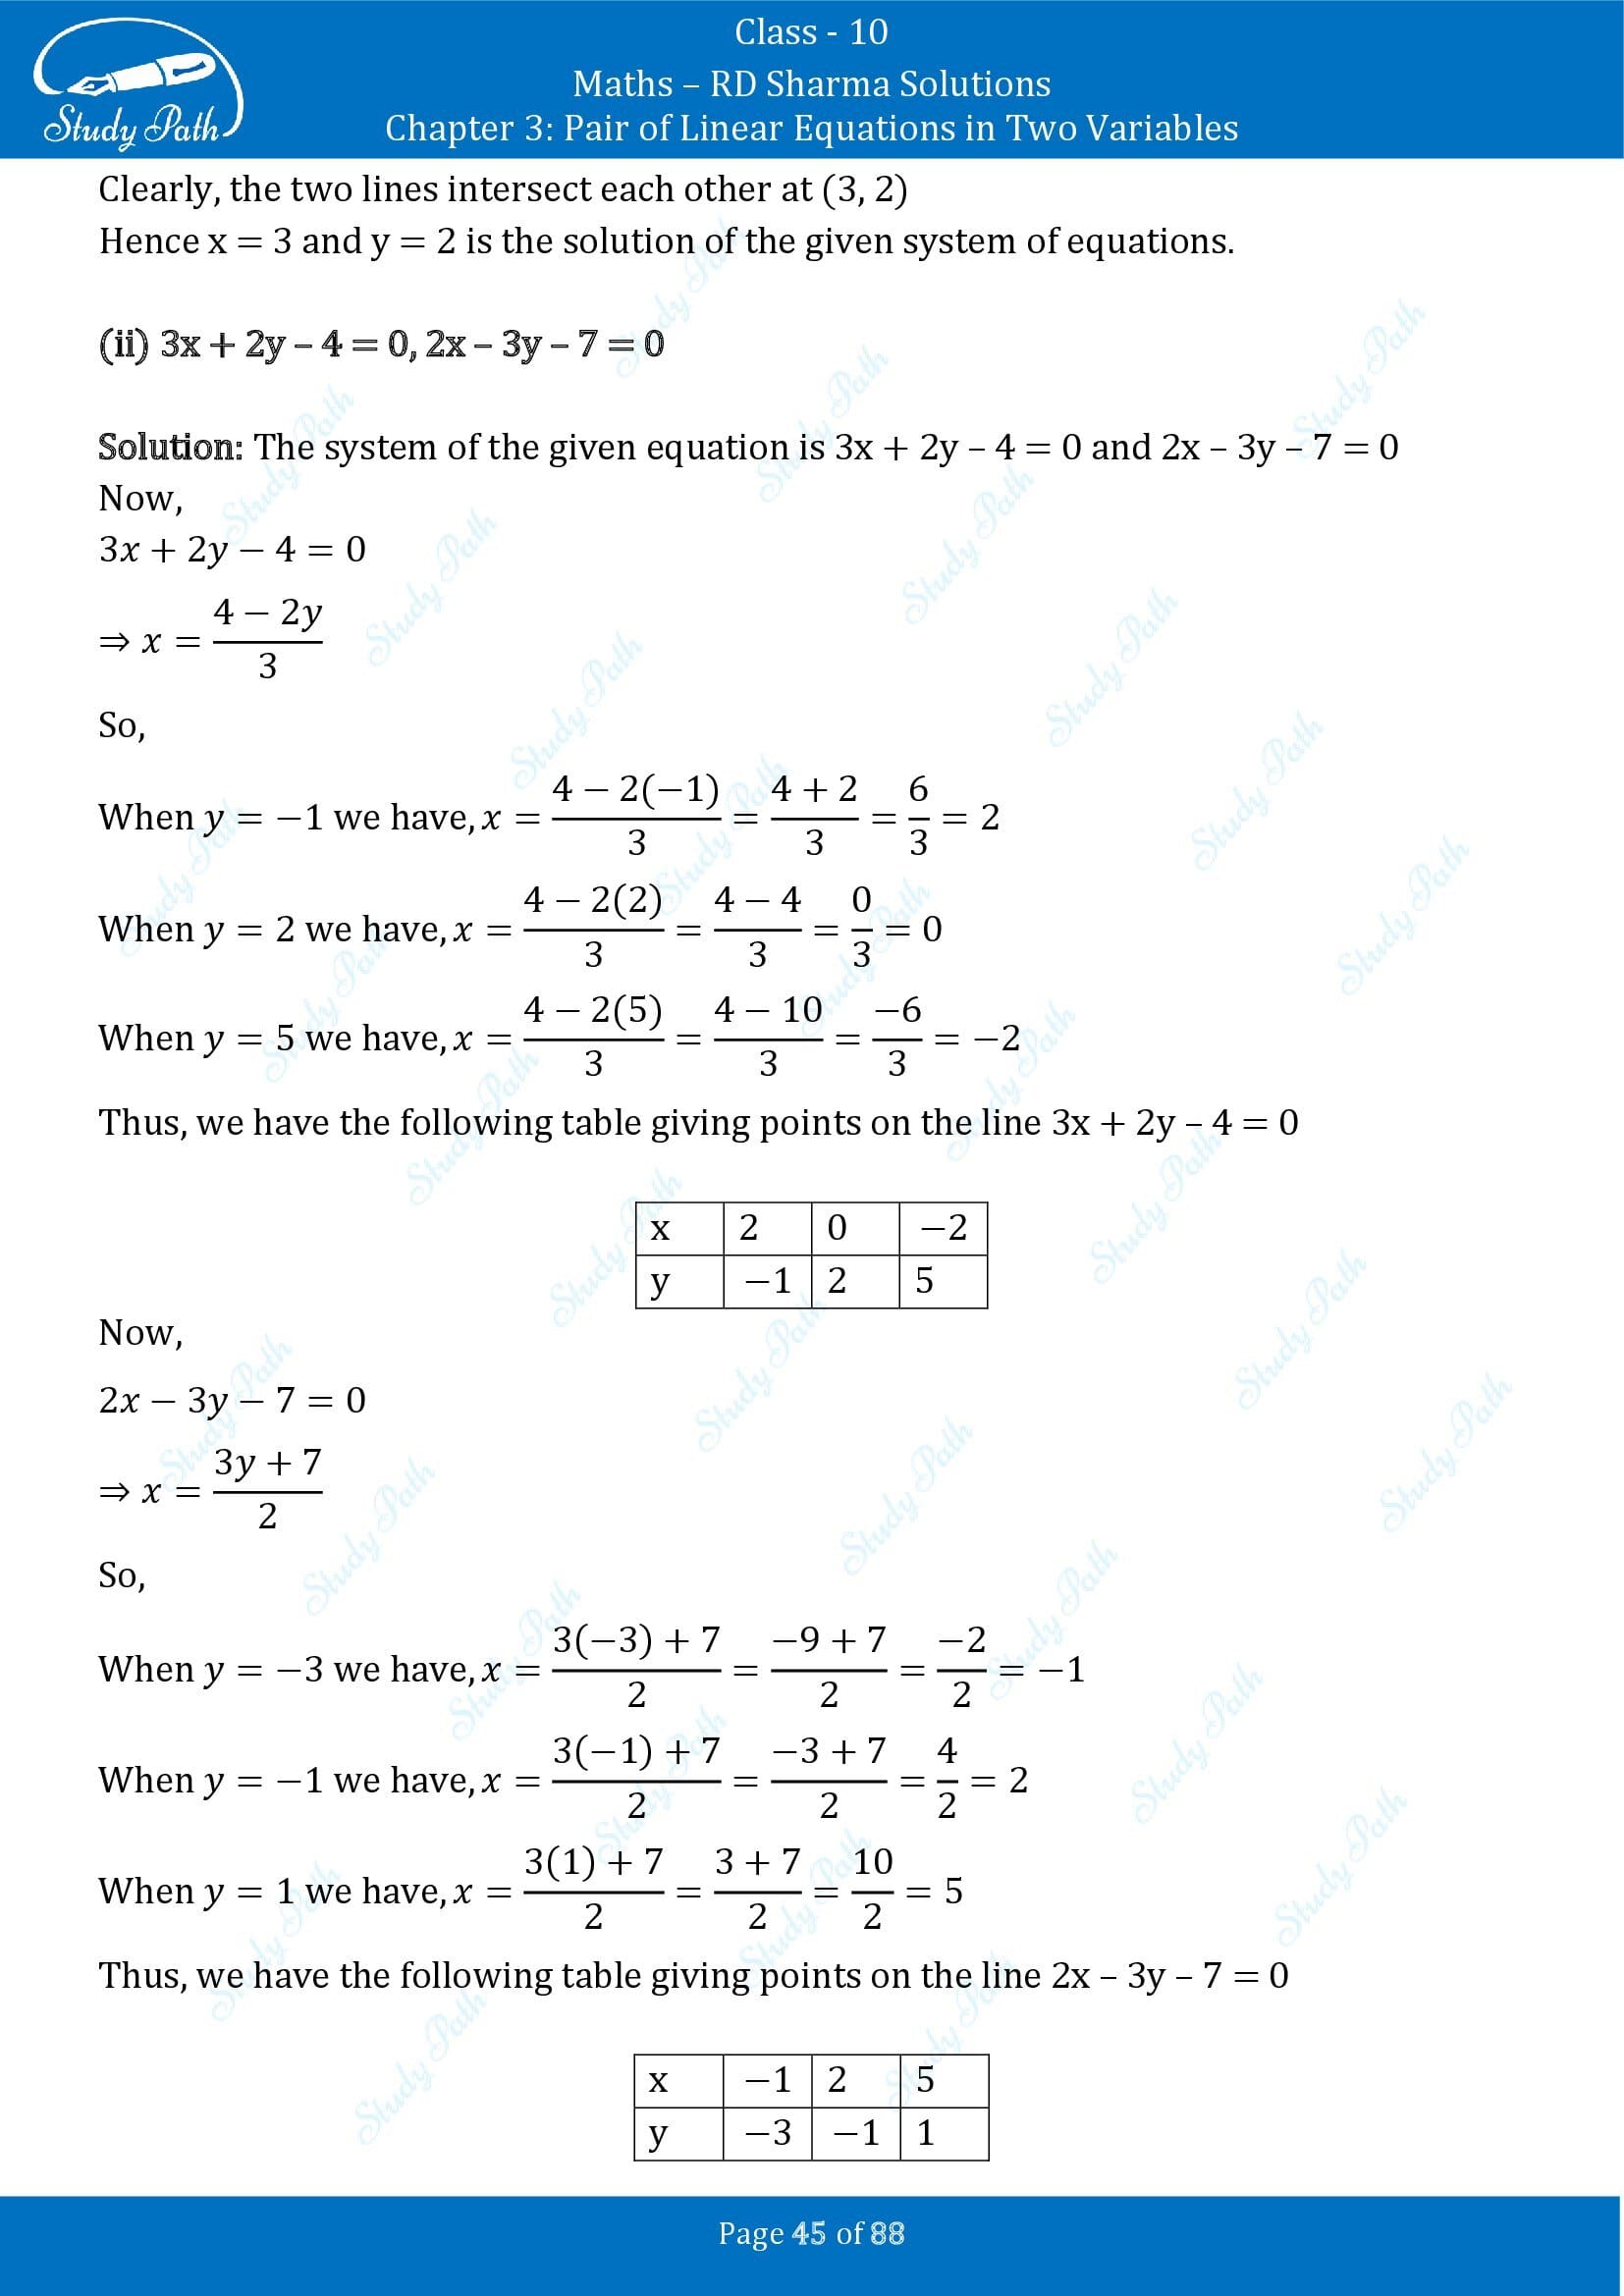 RD Sharma Solutions Class 10 Chapter 3 Pair of Linear Equations in Two Variables Exercise 3.2 00045